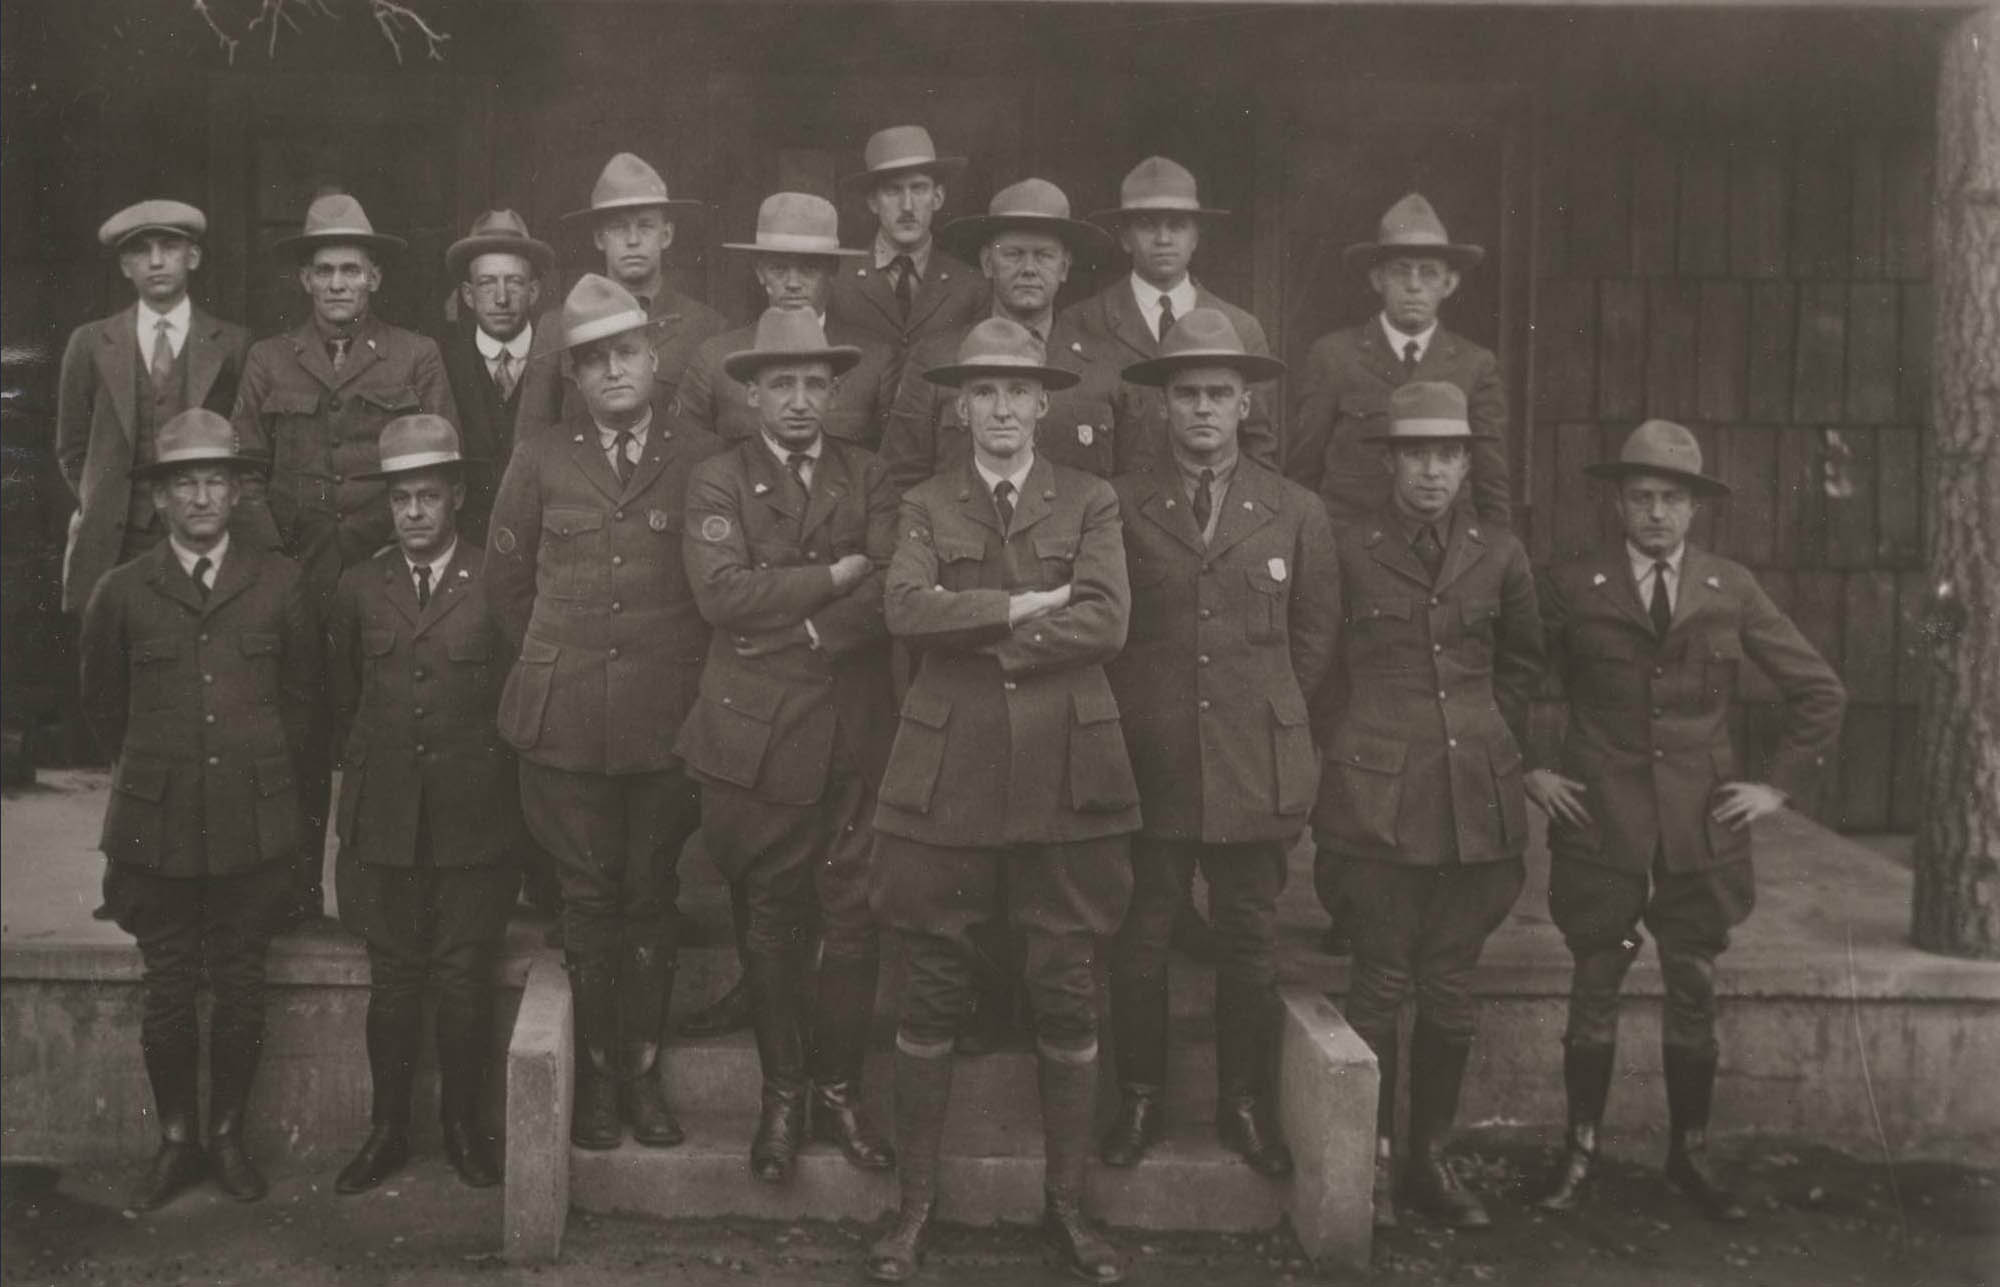 Seventeen men pose in in front of a building, 15 in NPS uniforms with broad brim hats. Shield-shaped badges are worn only by three men.